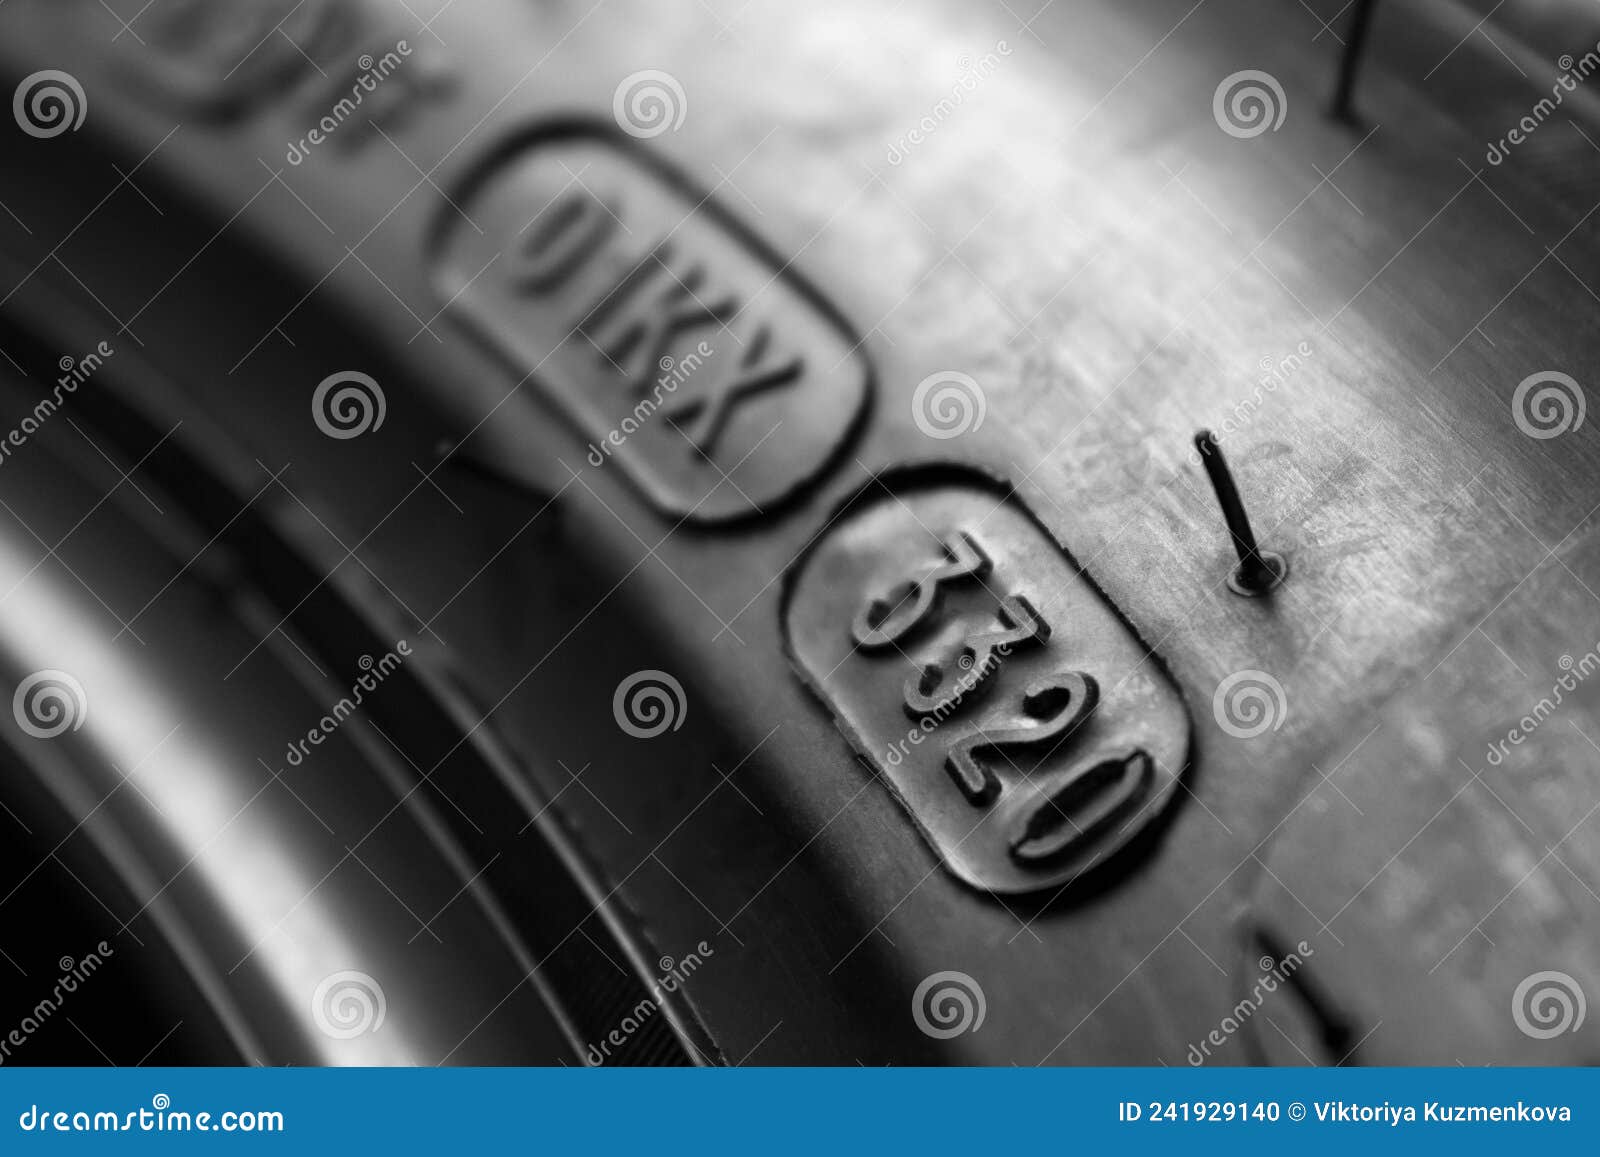 dot code and date of production of the tire on the sidewall of the wheel. close up. tire shelf life